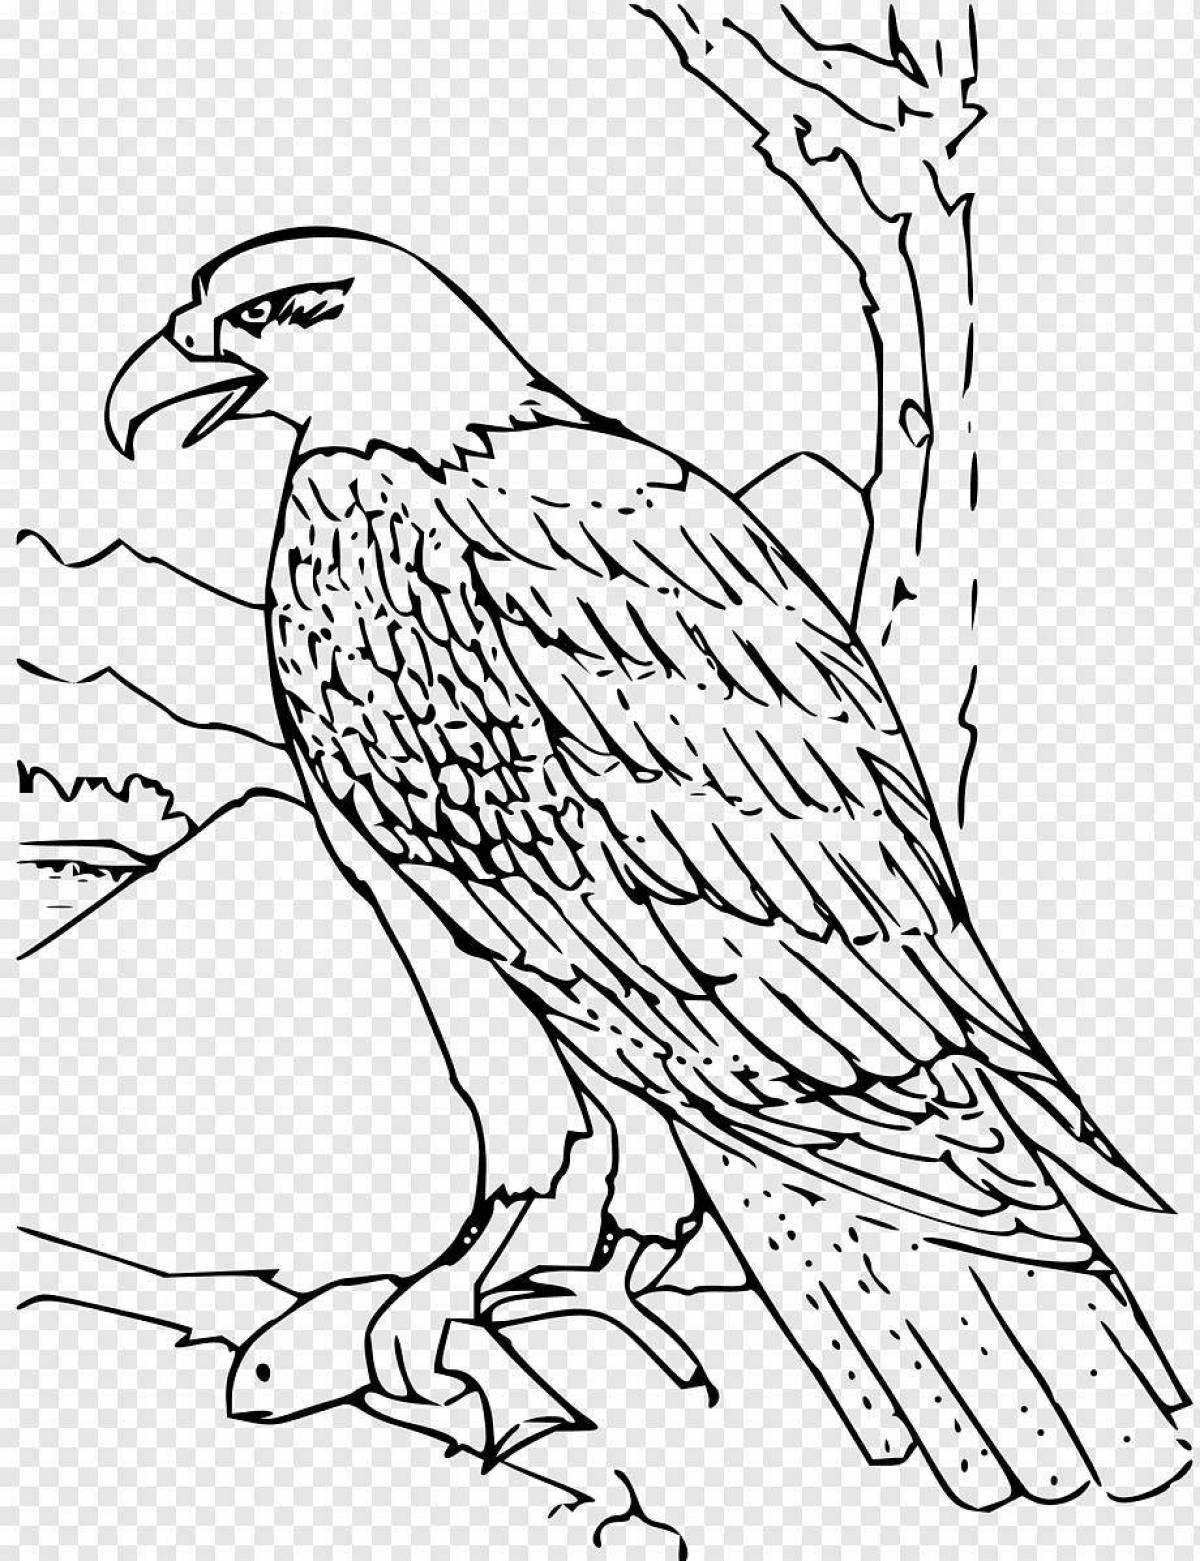 Great white-tailed eagle coloring page